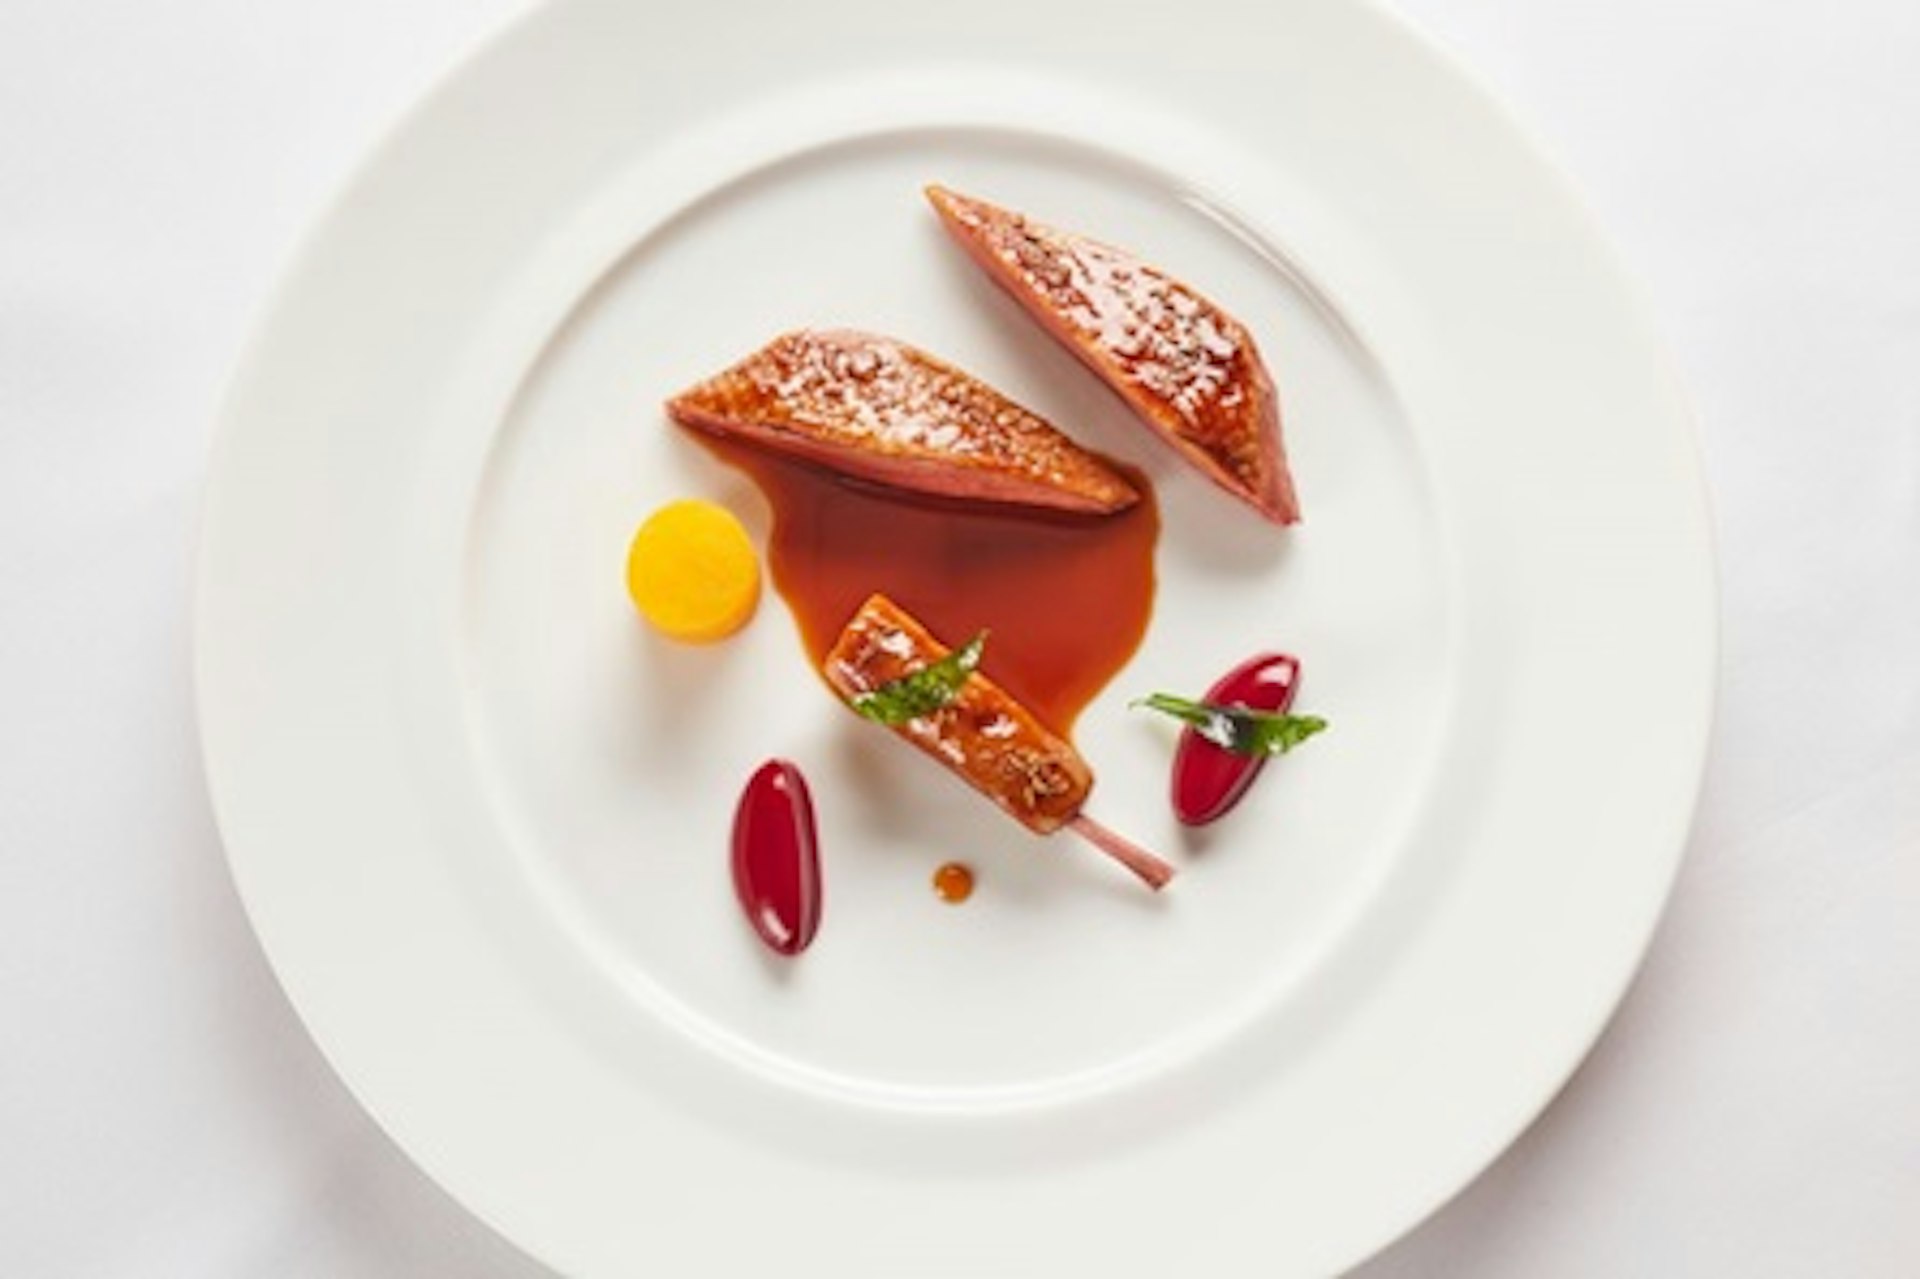 Six Course Dinner Tasting Menu with Champagne for Two at Ormer, Mayfair 1